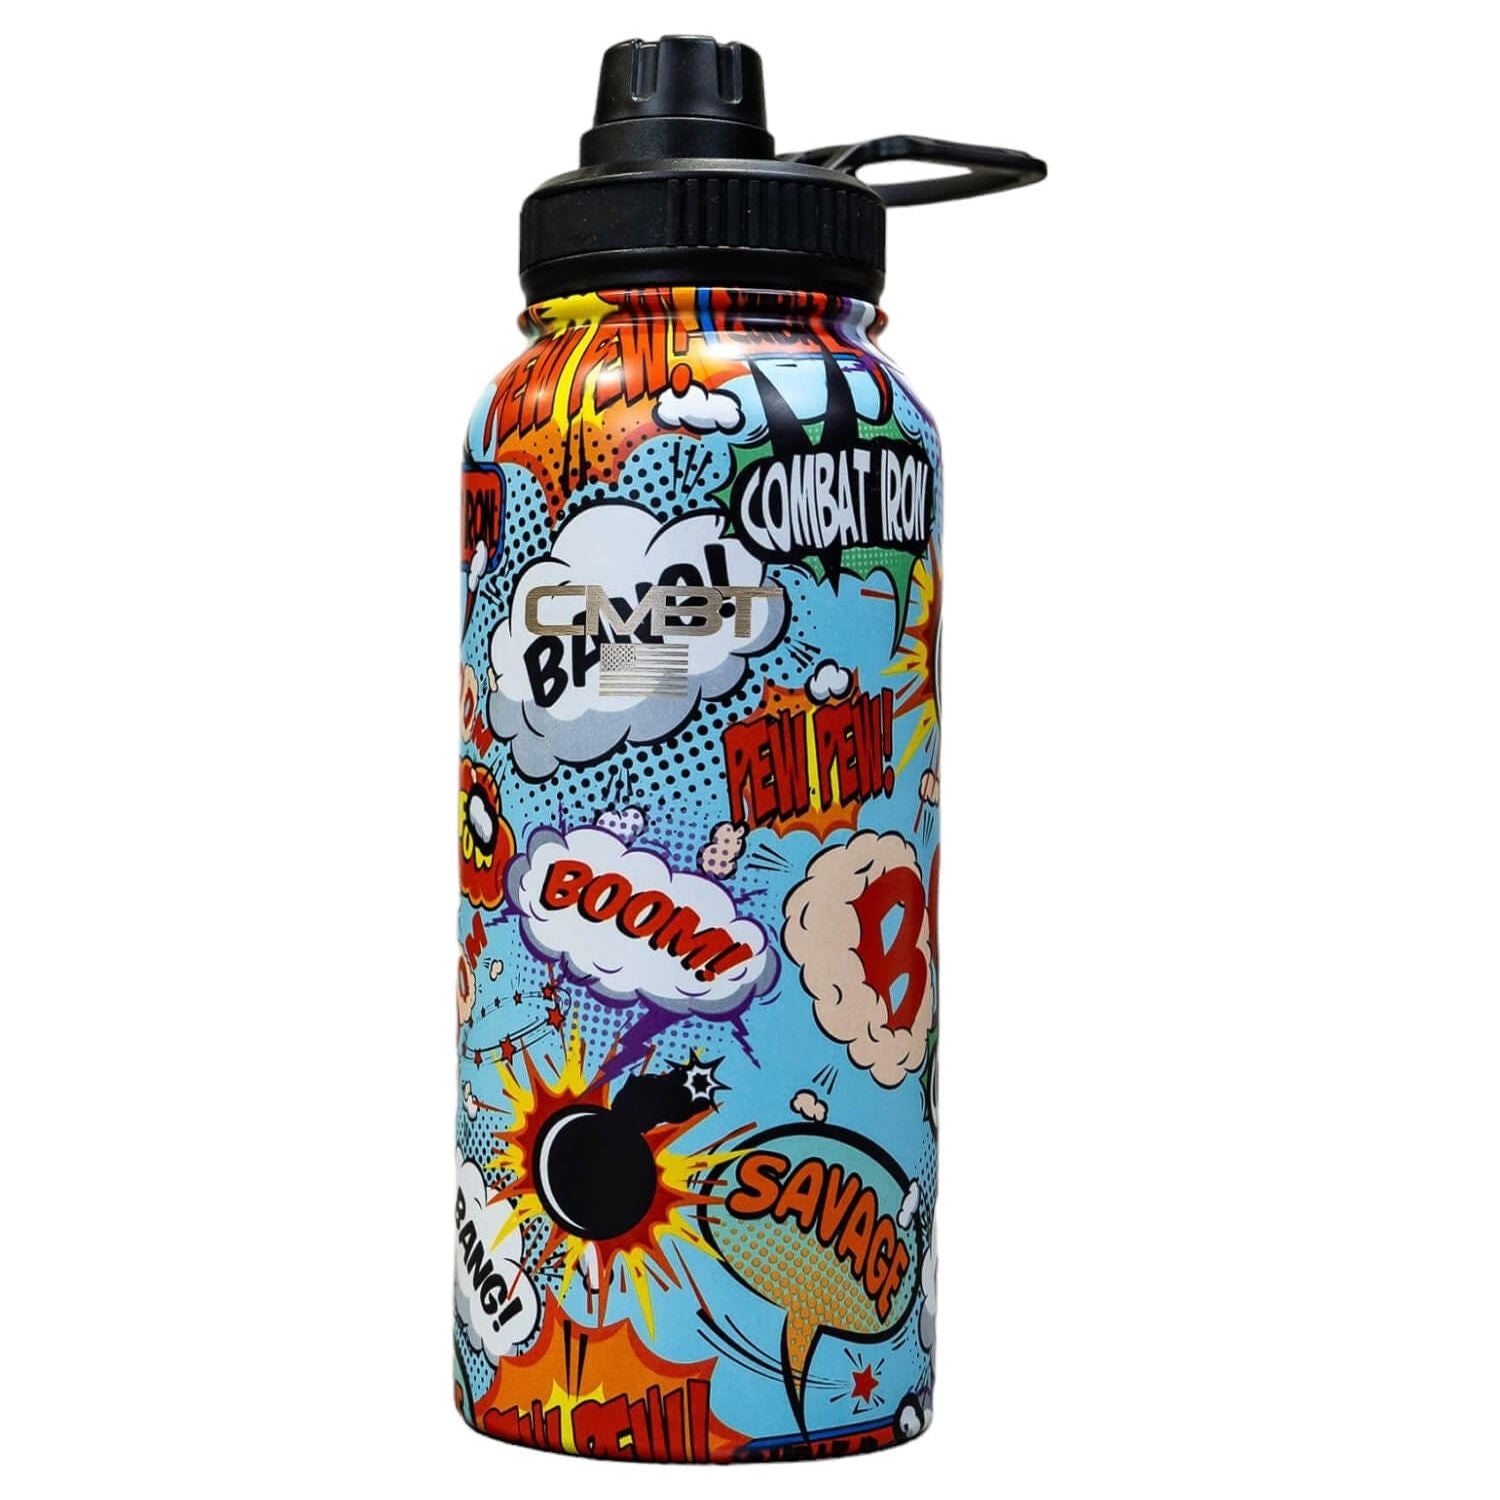 32oz Metal Insulated Hydration Bottle with Built in Drink Port V2 | Comic Book Edition